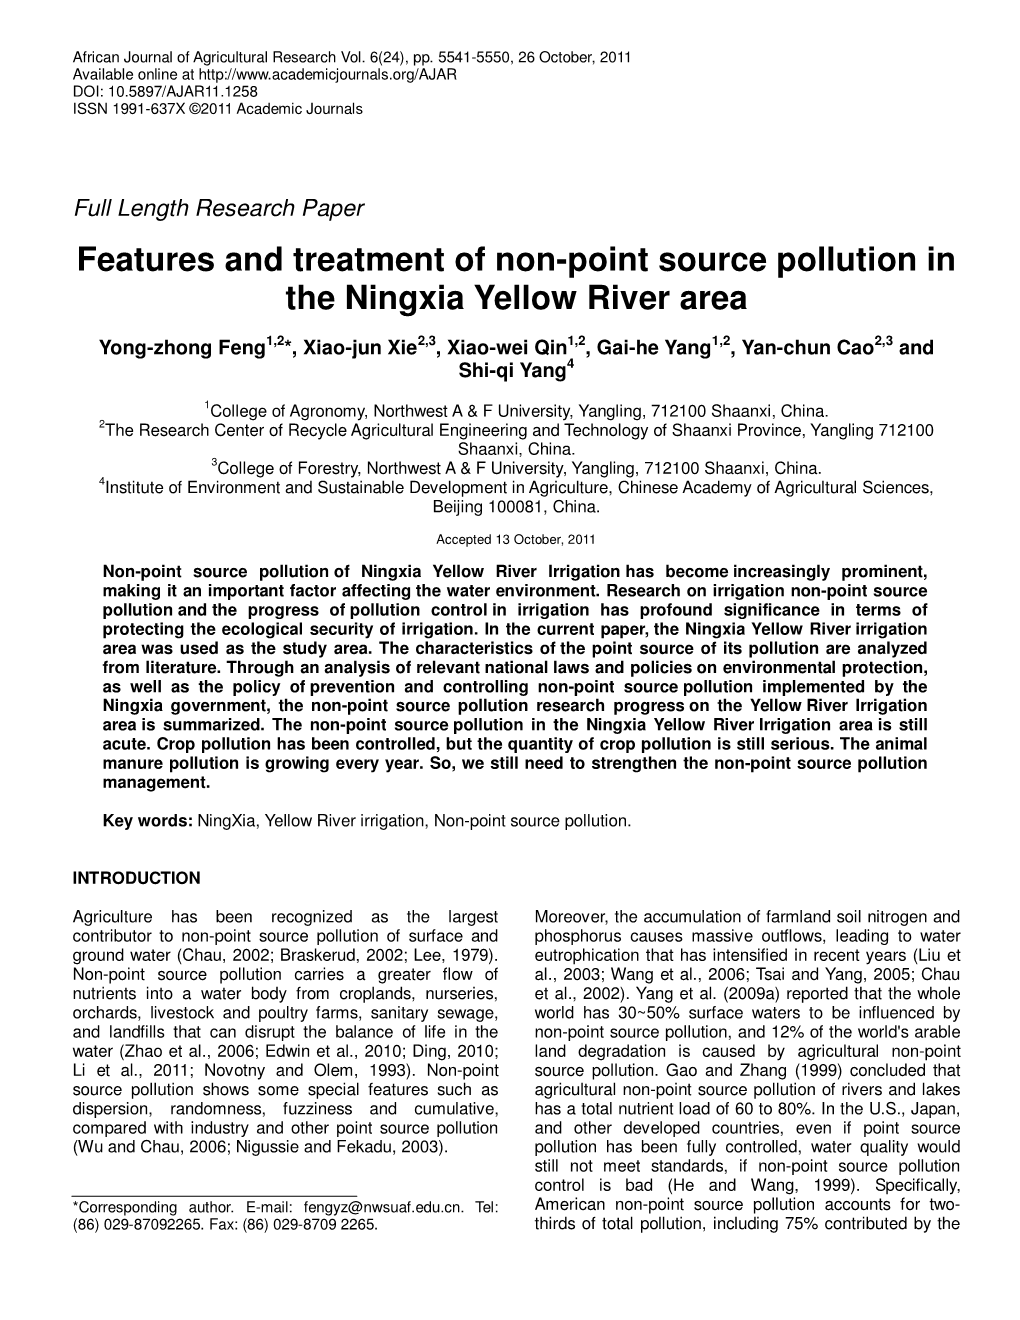 Features and Treatment of Non-Point Source Pollution in the Ningxia Yellow River Area